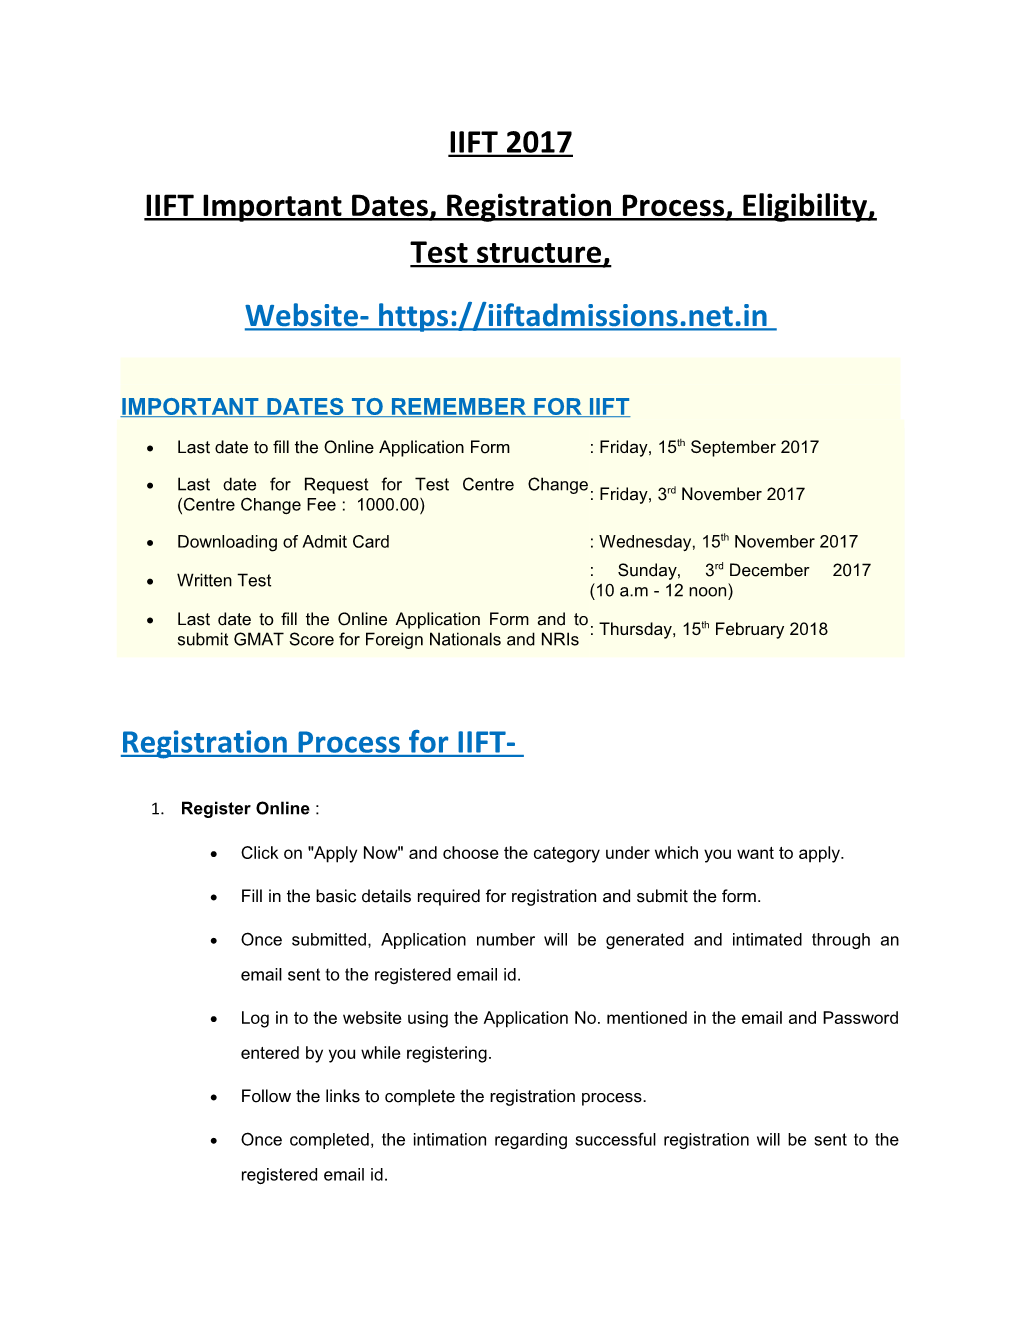 IIFT Important Dates, Registration Process, Eligibility, Test Structure